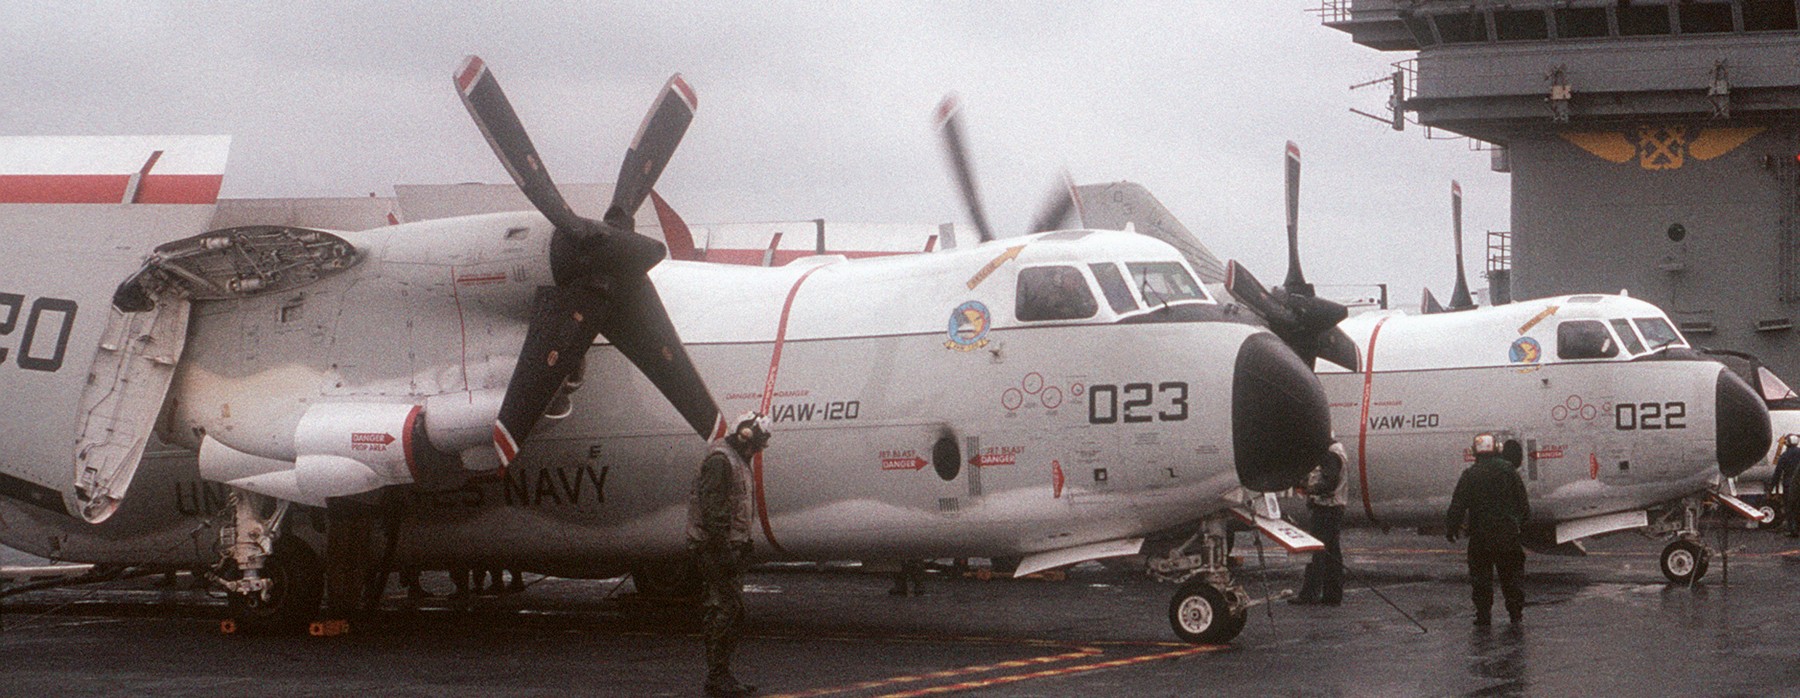 vaw-120 greyhawks carrier airborne early warning squadron c-2a greyhound replacement uss dwight d. eisenhower cvn-69 130